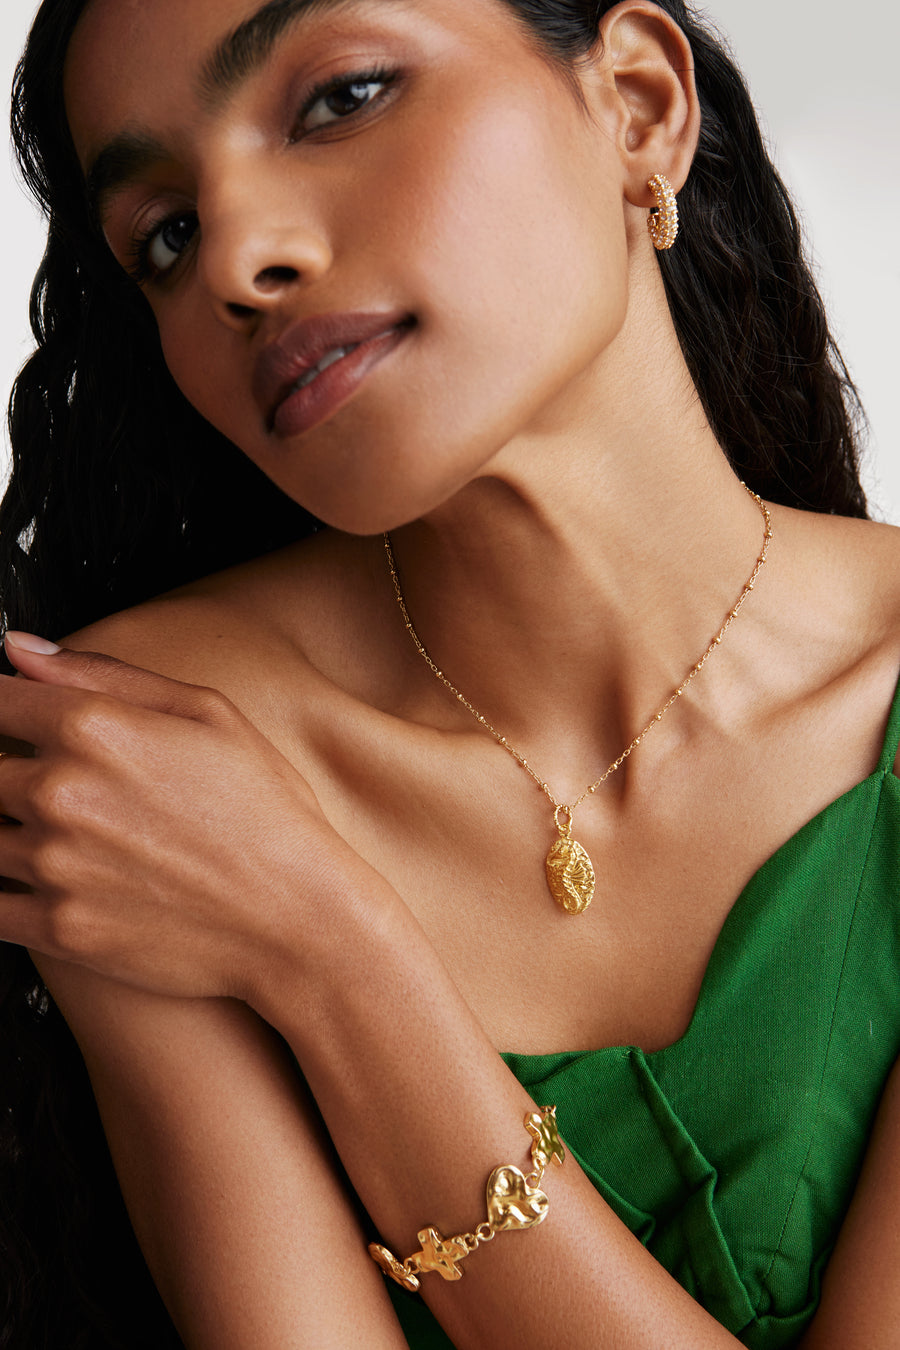 Model shot wearing Soru bracelet features interlocking mixed heart and cross links with a toggle clasp fastening for ease looking forward. Model also wearing seahorse pendant necklace and crystal and gold hoop earrings